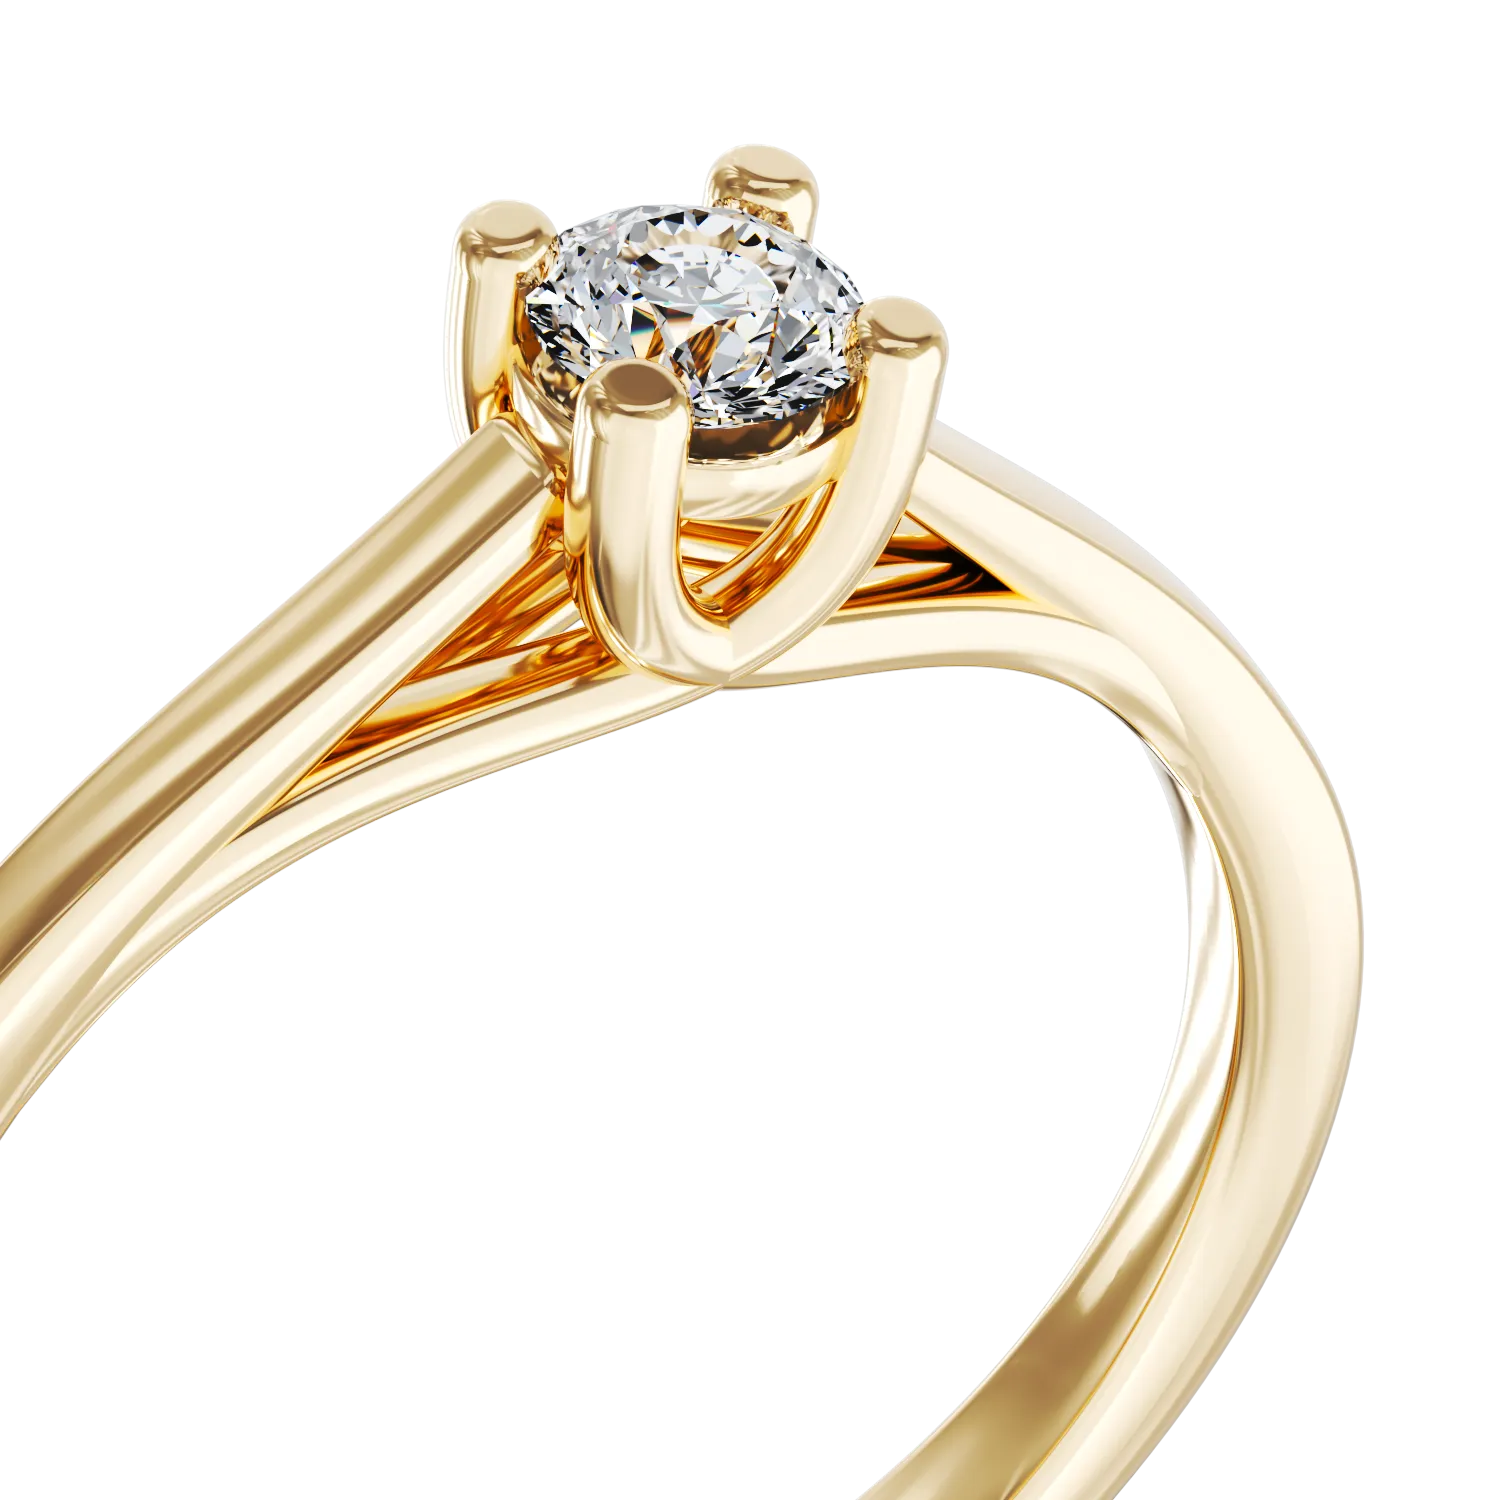 18K yellow gold engagement ring with a 0.16ct solitaire diamond